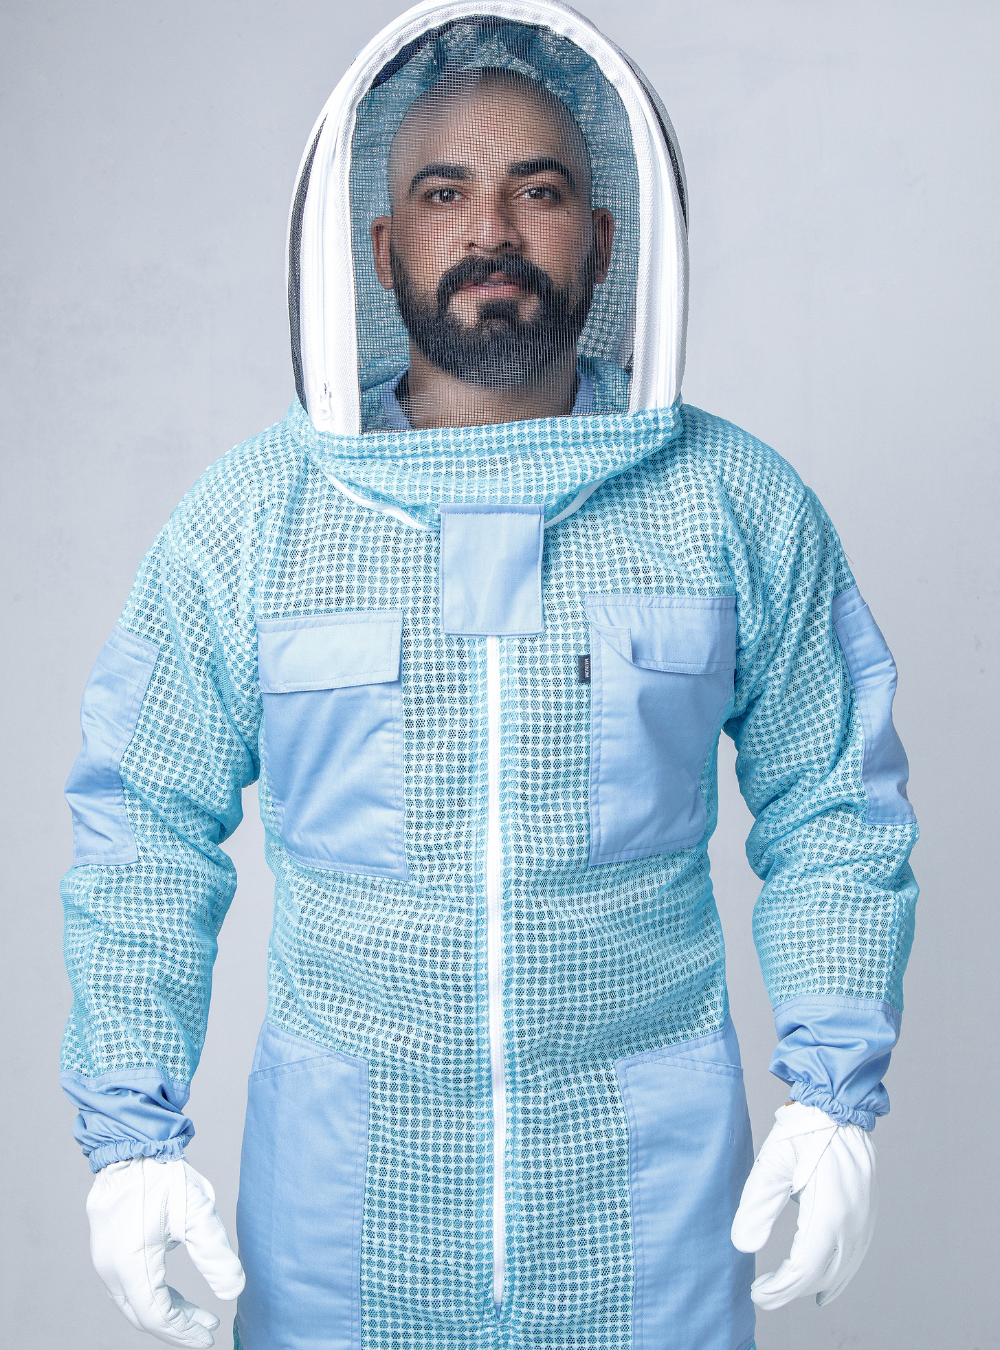 BlueSky Beekeeper Suit' with a Ventilated Fencing hood, Gloves, Ample pockets and blue pattern.